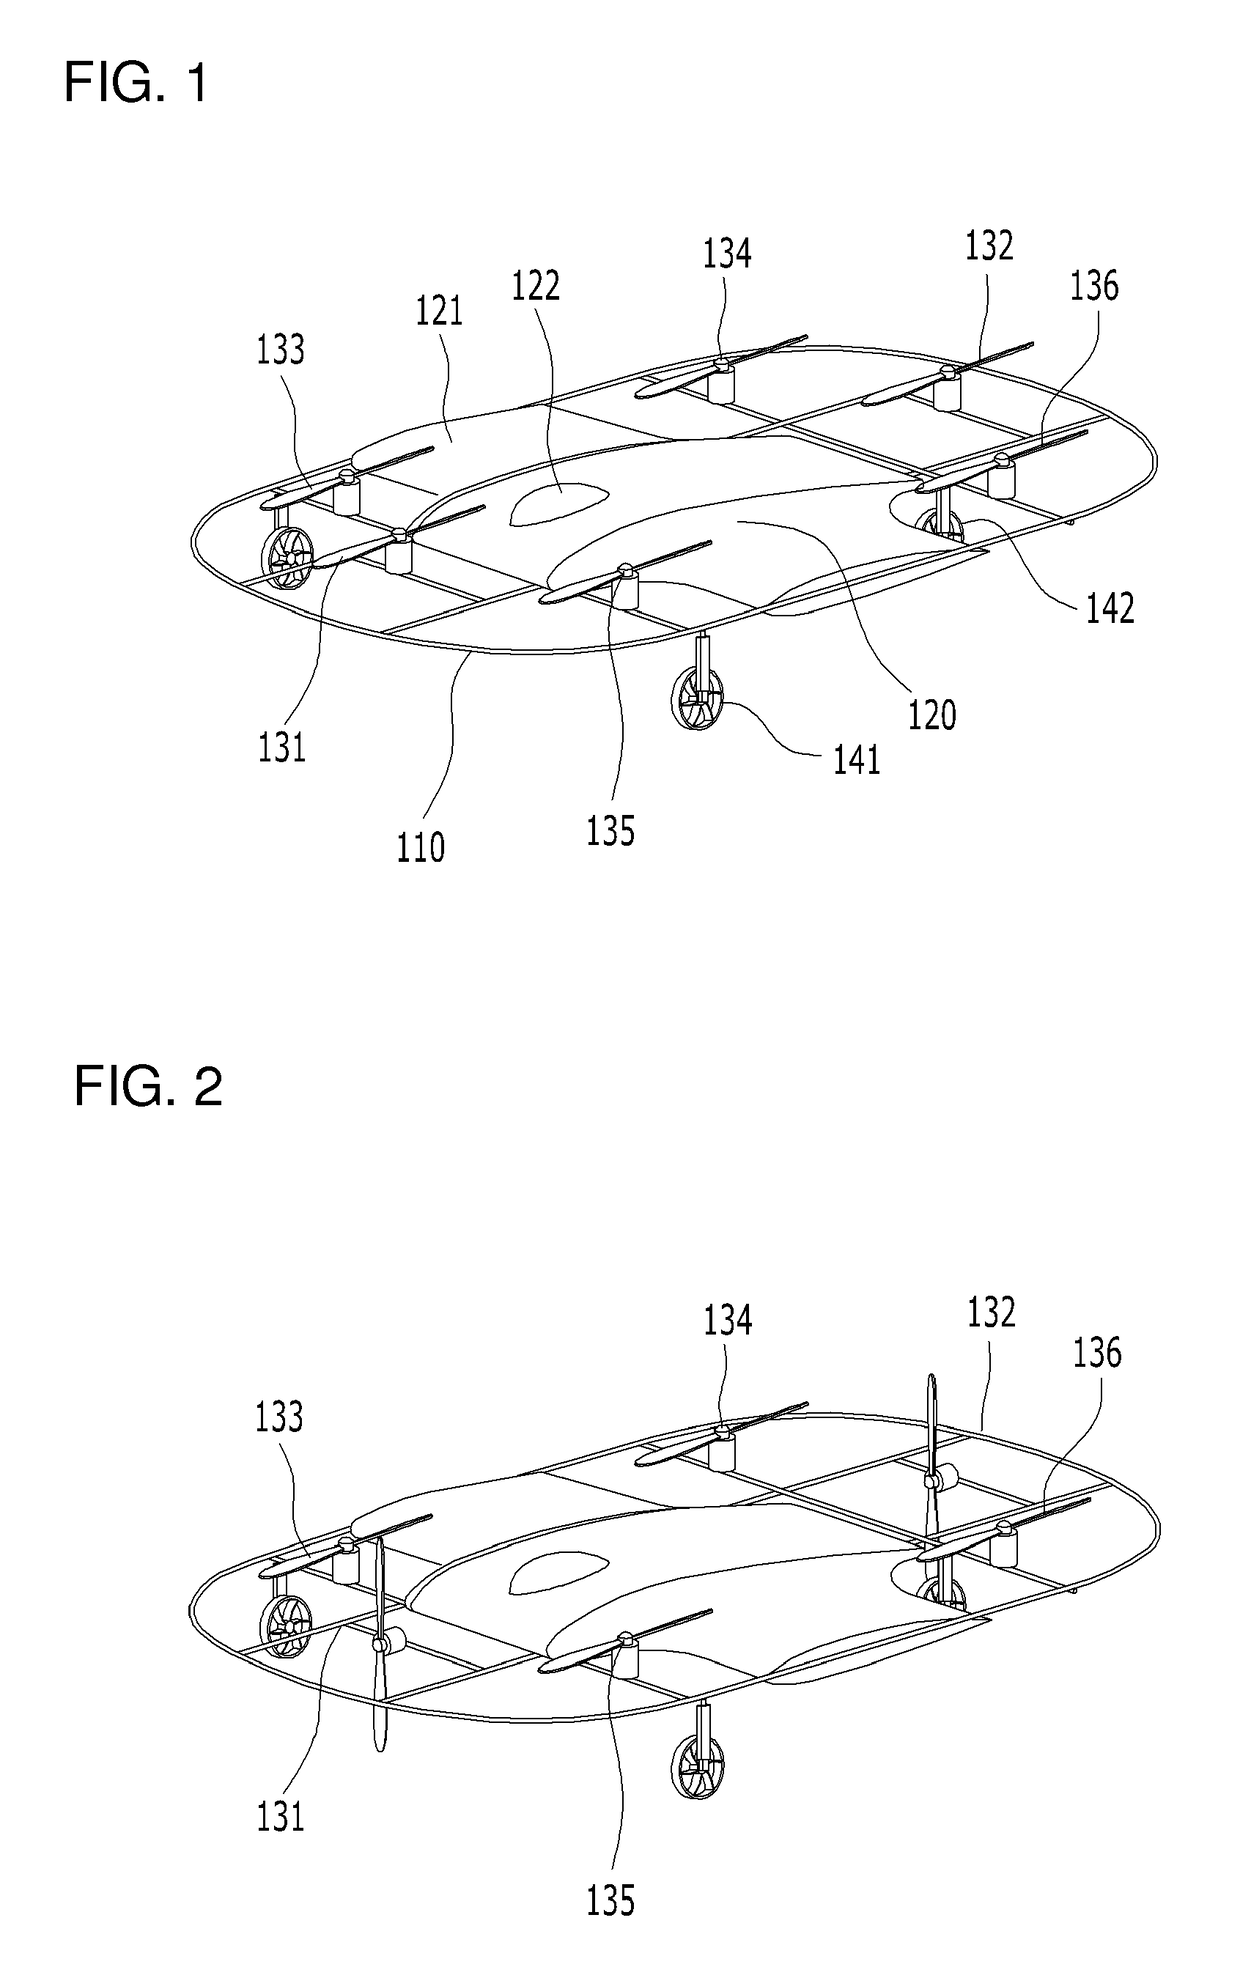 Multi-stage tilting and multi-rotor flying car